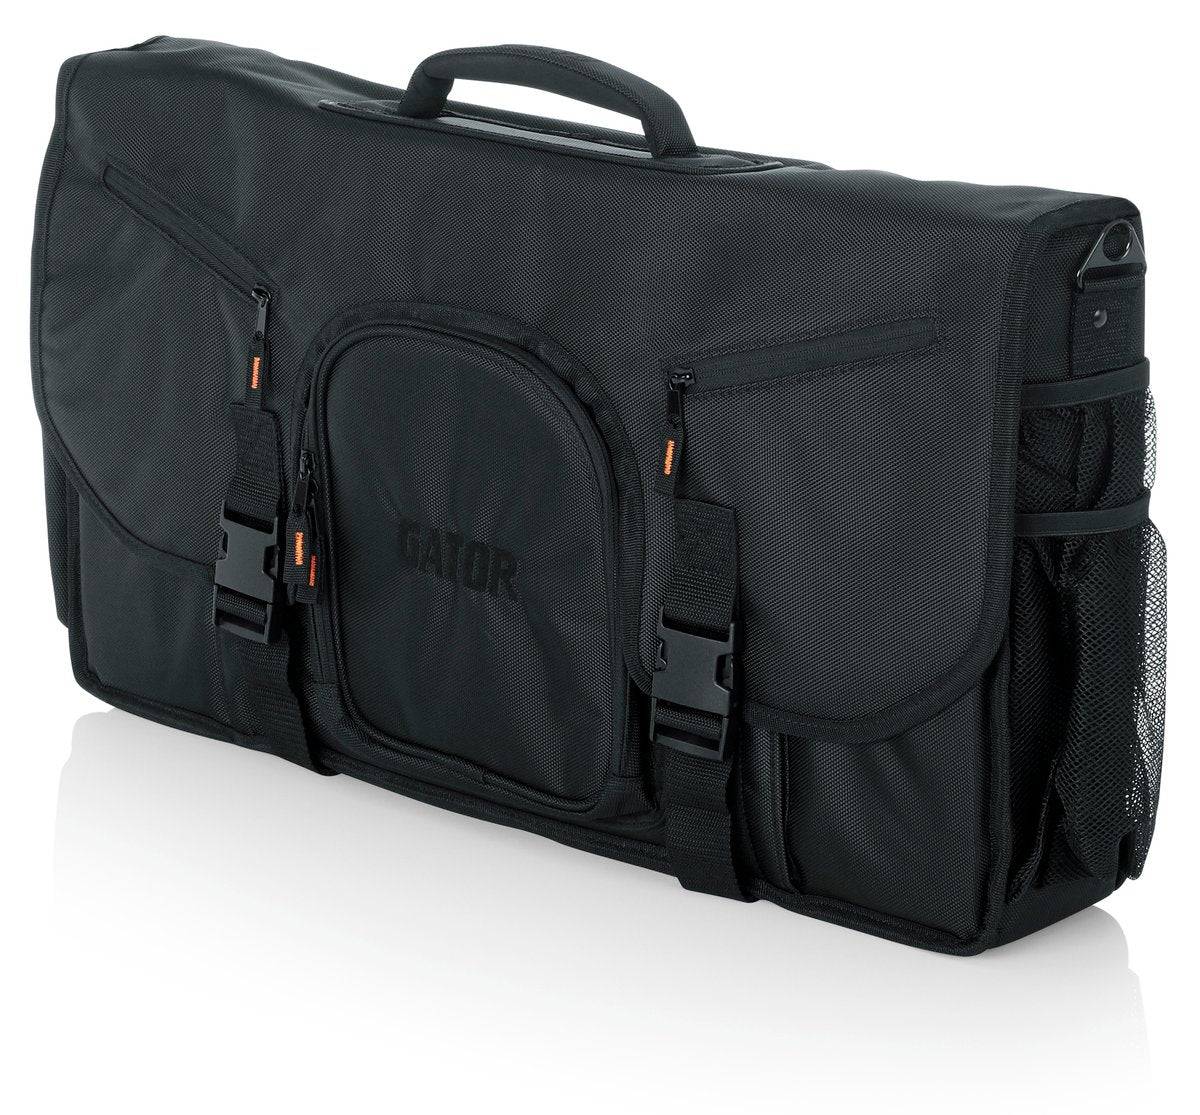 G-Club Series Messenger Style Bag to hold Laptop based DJ midi Controllers up to 25", laptop, and headphones